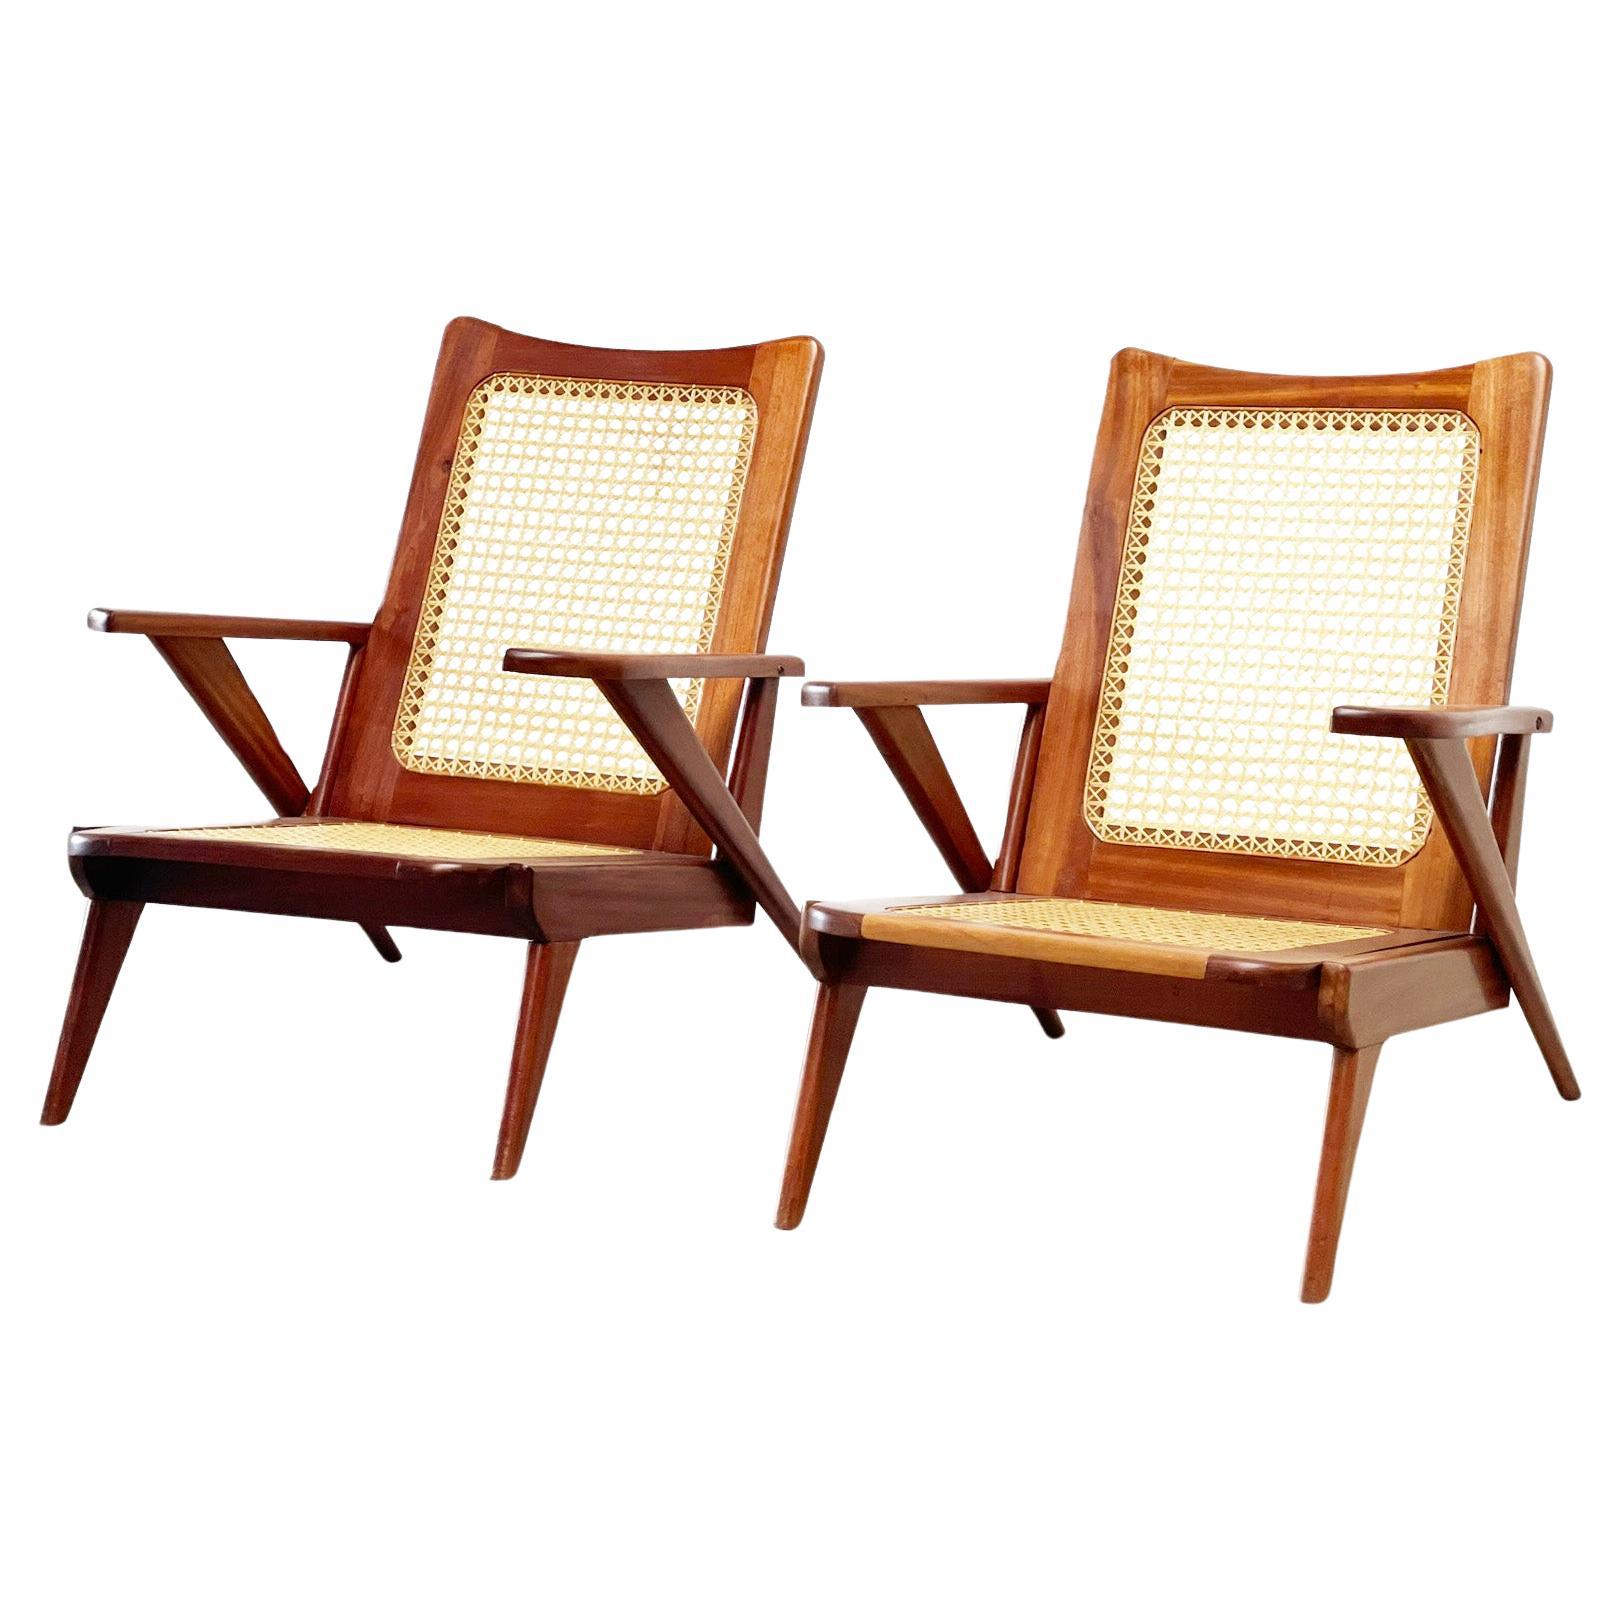 Sculptural french lounge chairs 1950's.